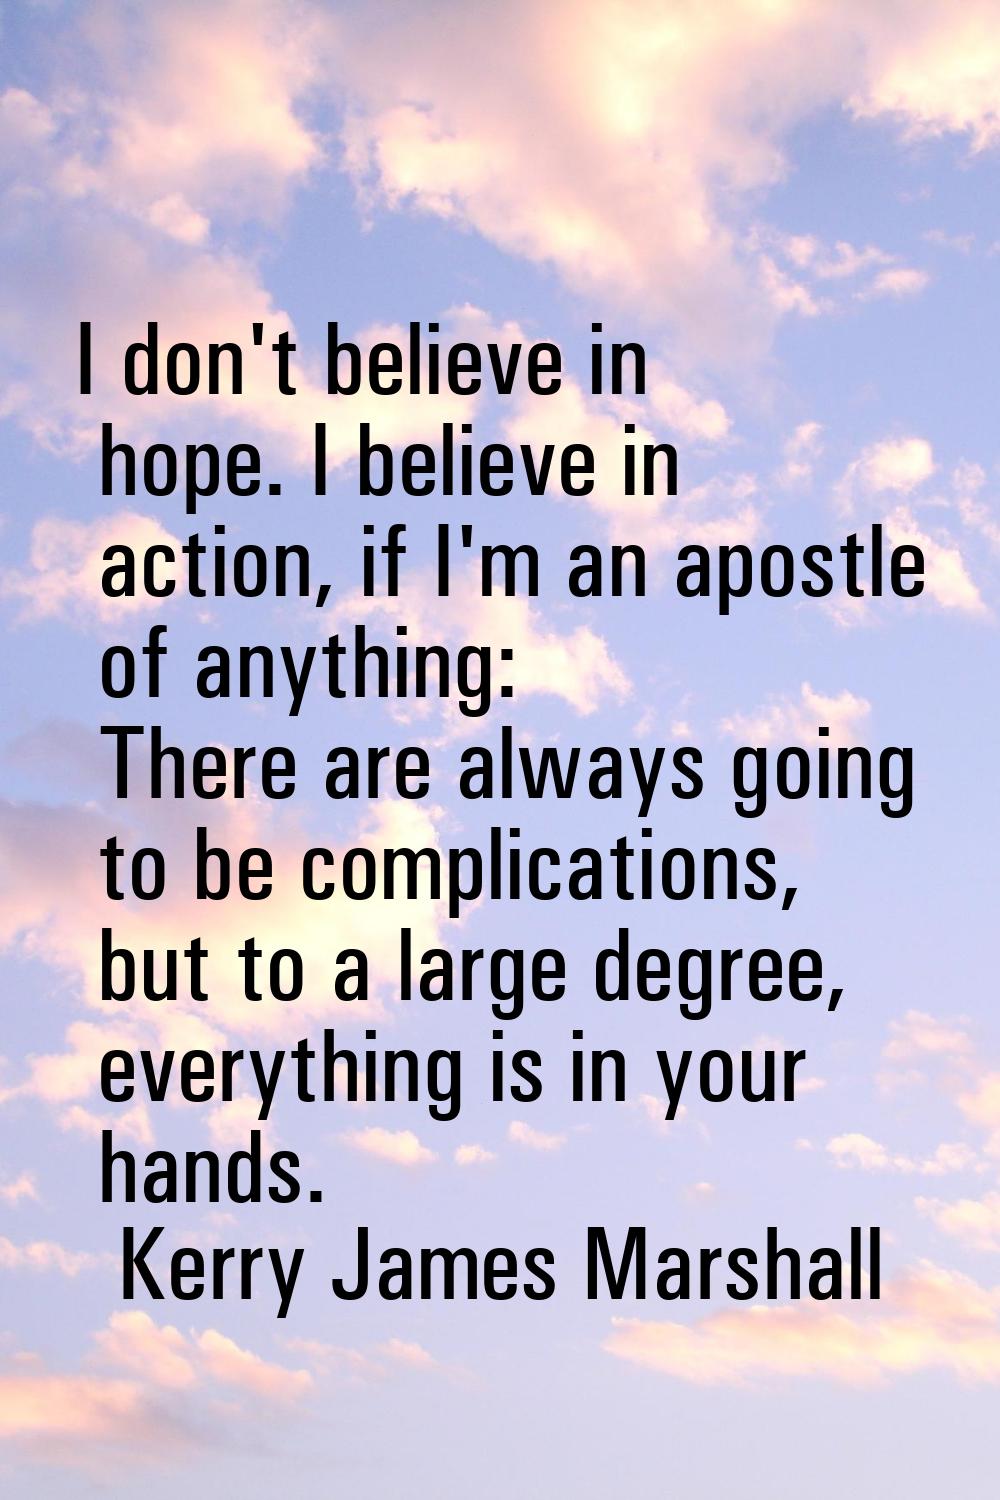 I don't believe in hope. I believe in action, if I'm an apostle of anything: There are always going